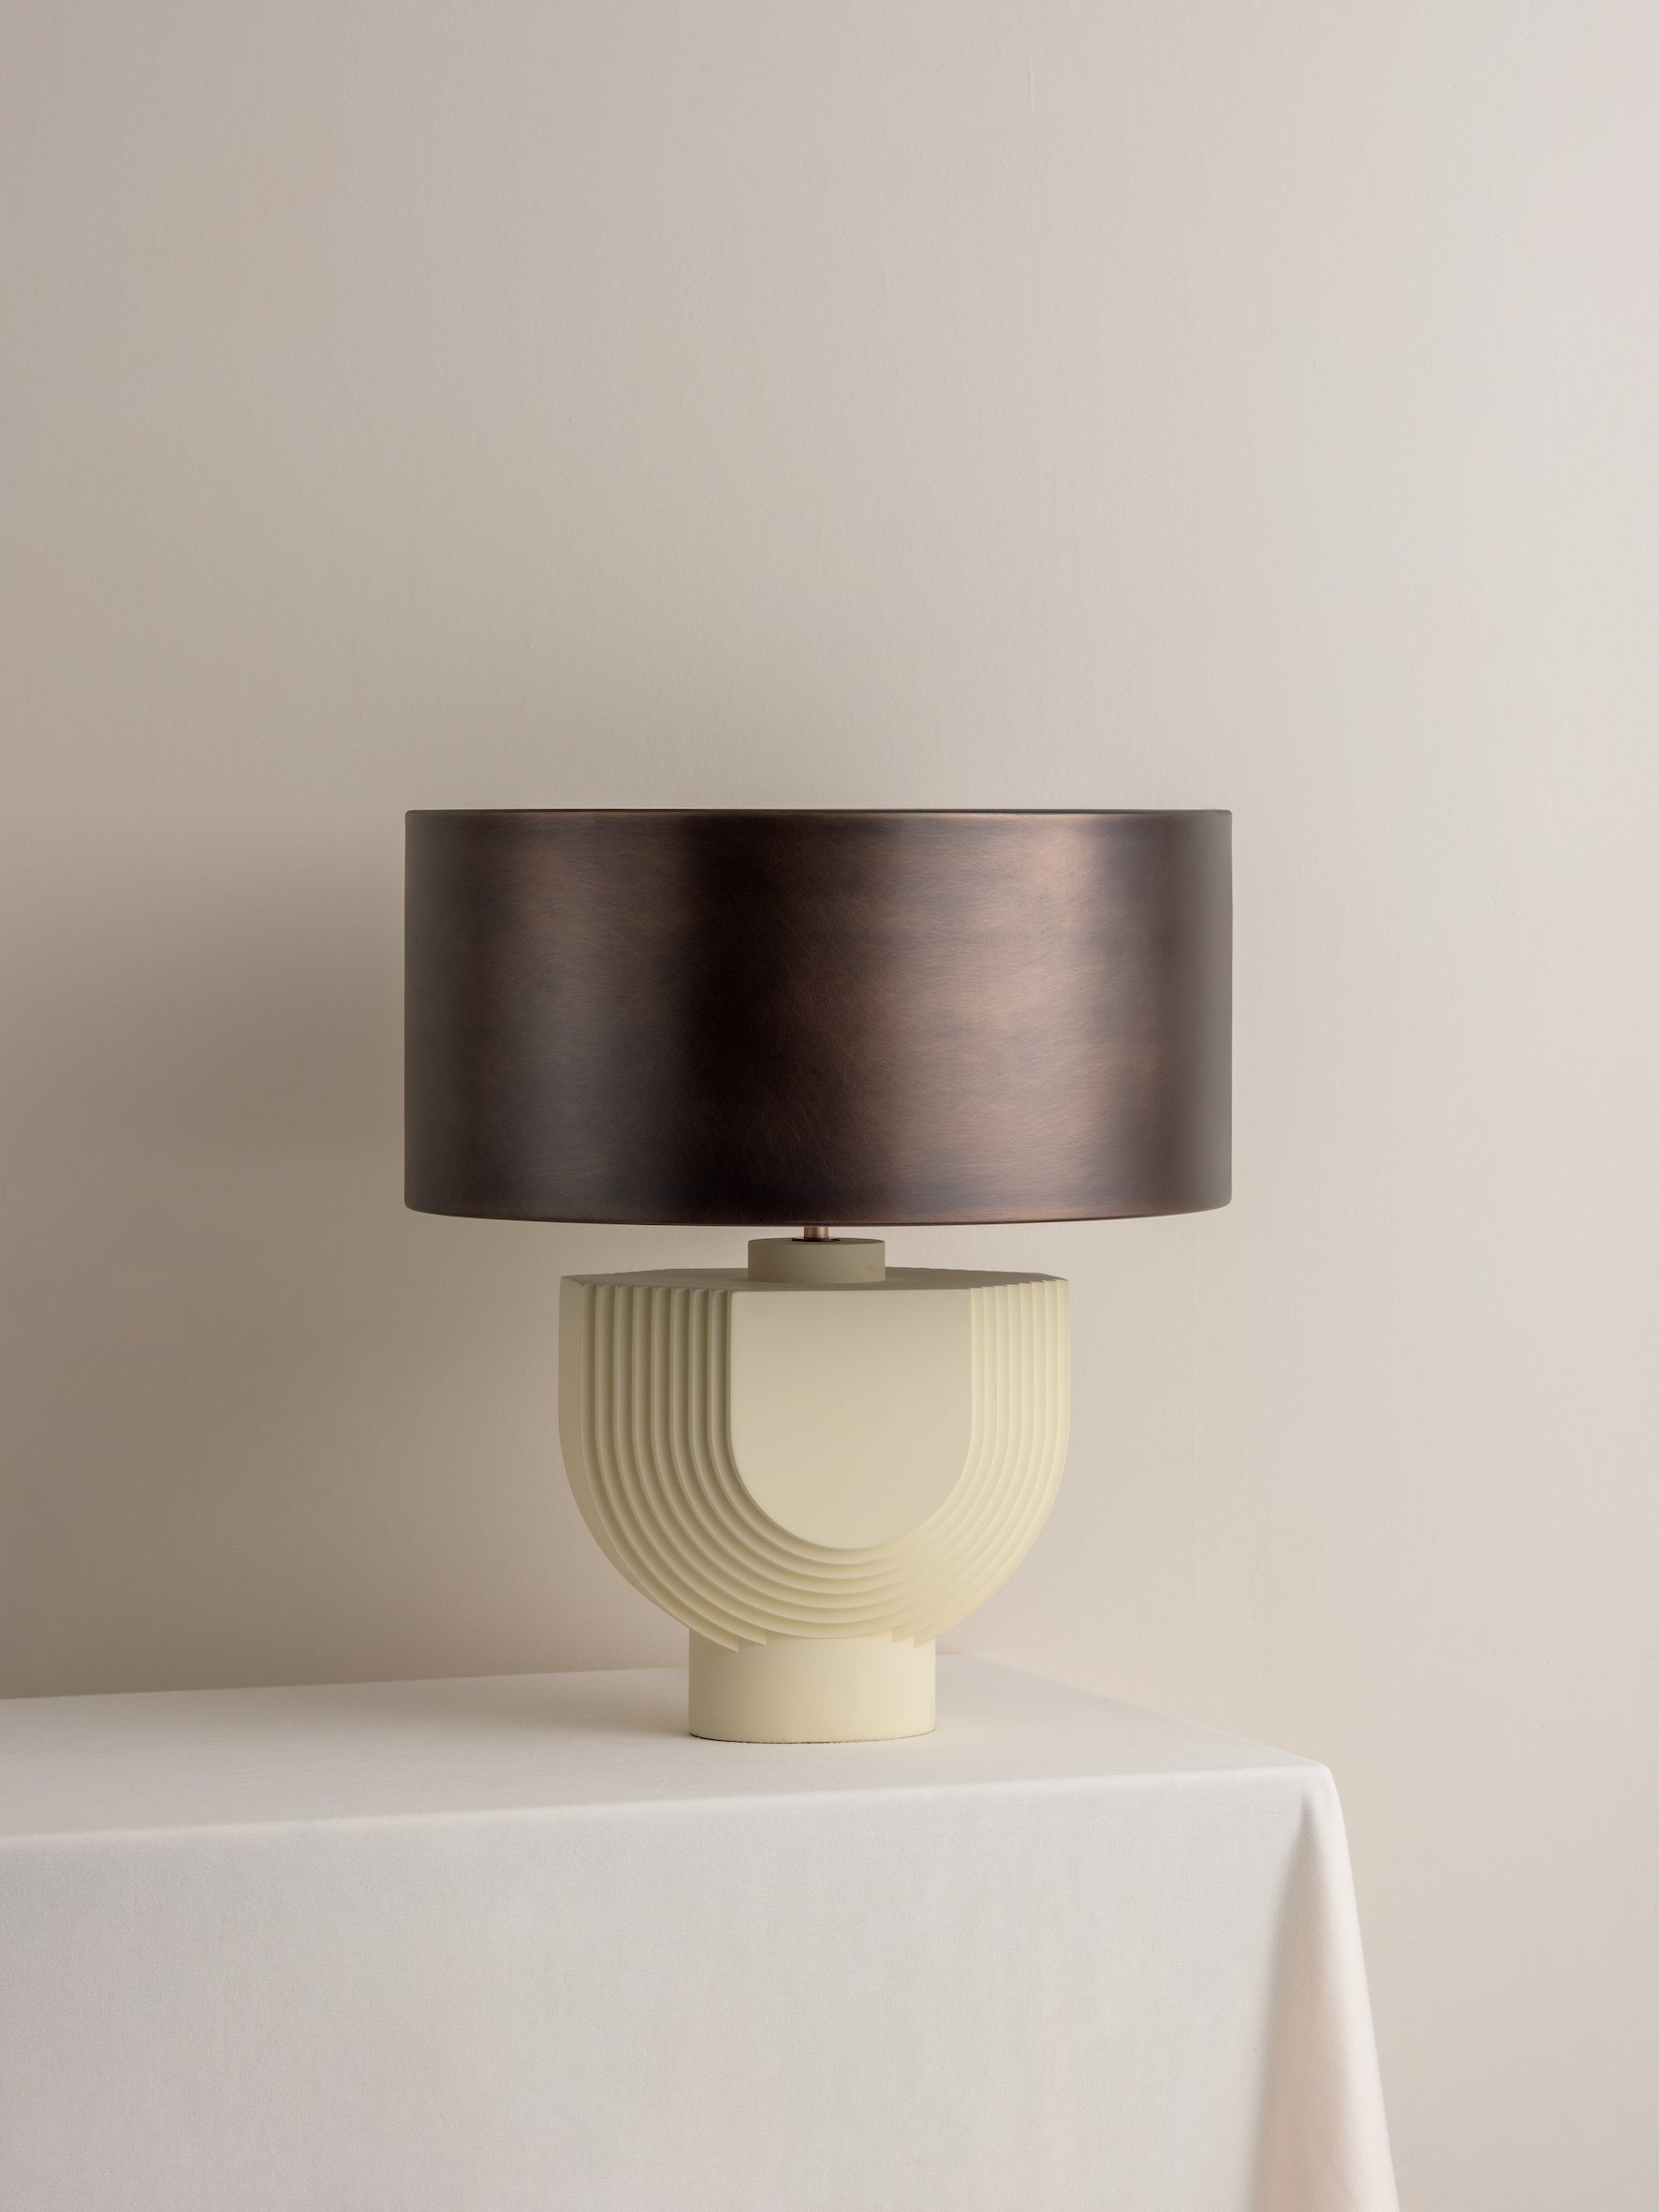 Editions concrete lamp with + bronze shade | Table Lamp | Lights & Lamps | UK | Modern Affordable Designer Lighting